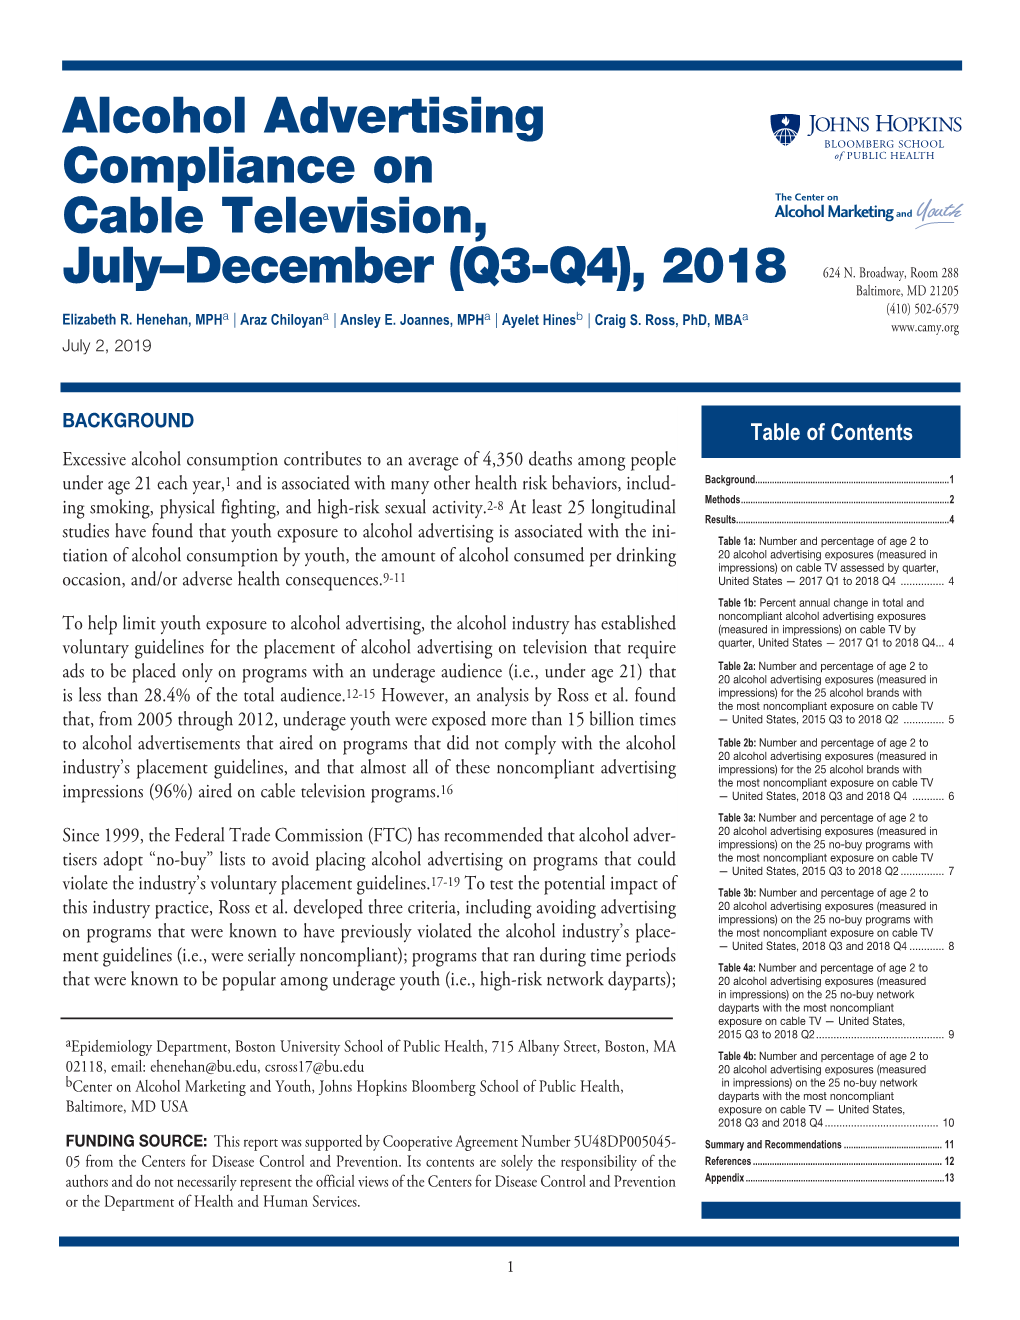 Alcohol Advertising on Cable Television, July-December 2018